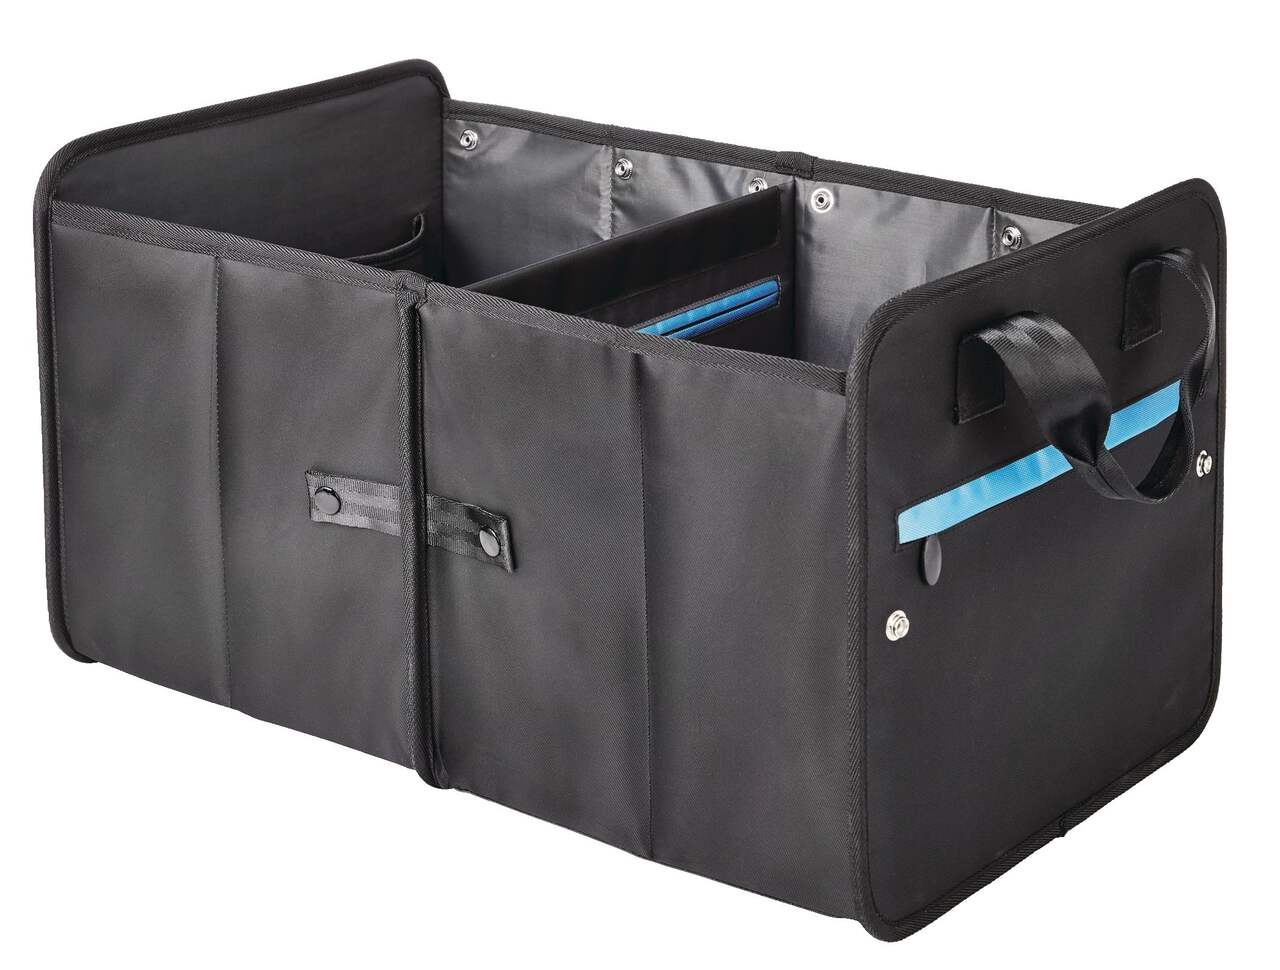 https://media-www.canadiantire.ca/product/automotive/car-care-accessories/auto-accessories/0372574/autotrends-trunk-organizer-85ae1c5a-eb6f-40b1-9f64-fe0357e9b2a8-jpgrendition.jpg?imdensity=1&imwidth=640&impolicy=mZoom